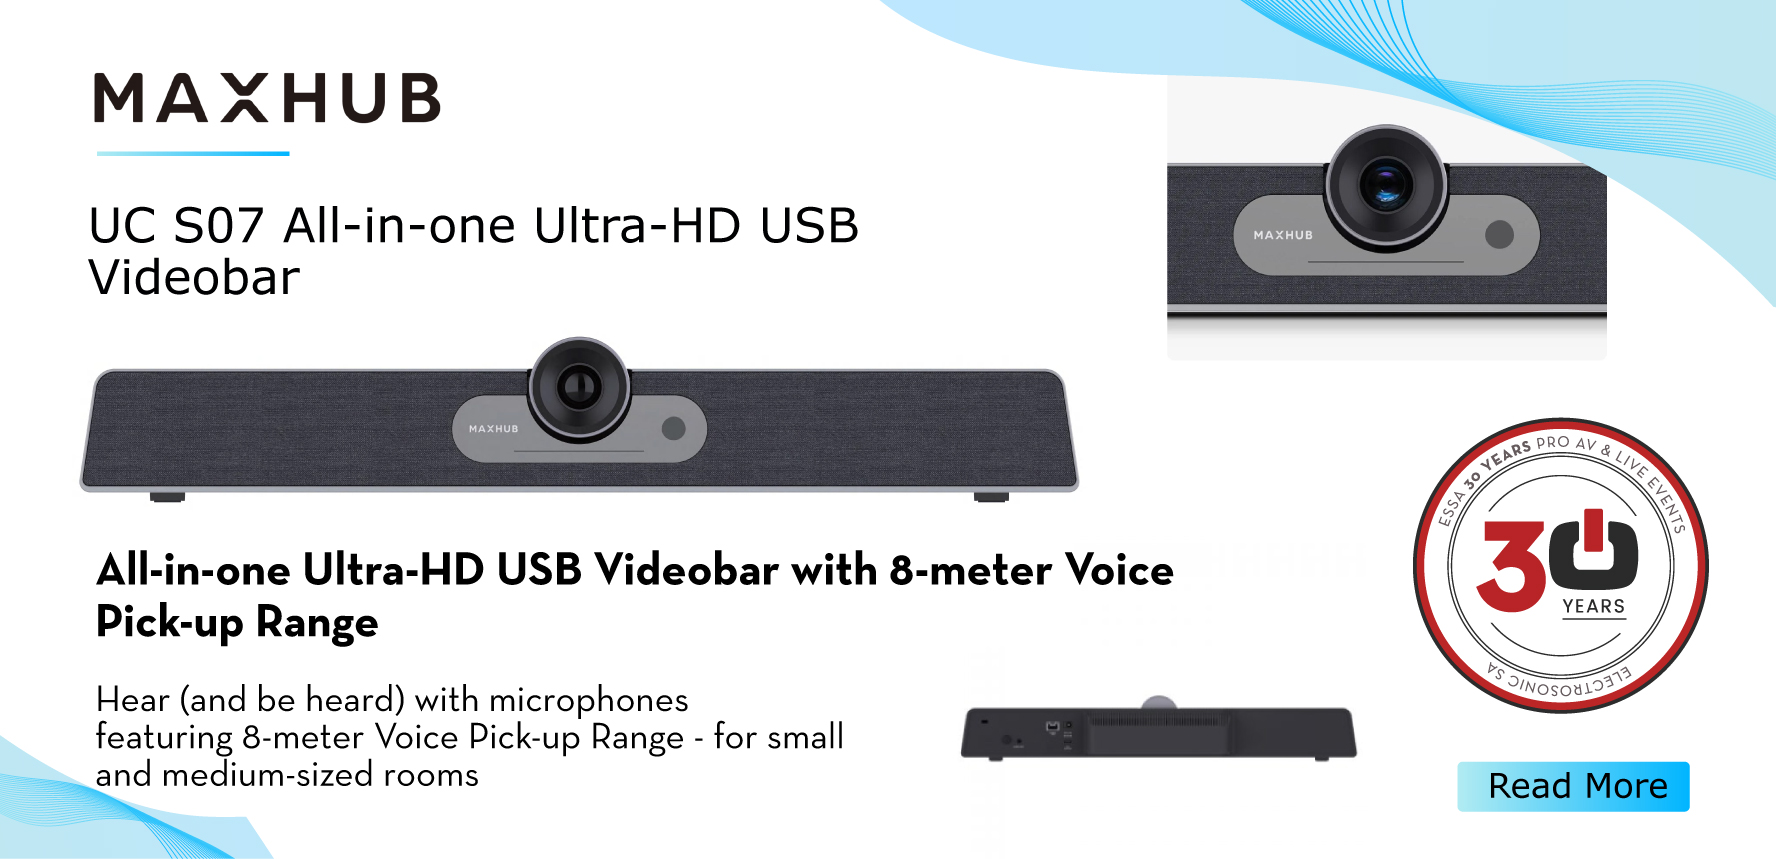 MAXHUB UC S07 All-in-one Ultra-HD USB Videobar with 8-meter Voice Pick-up Range